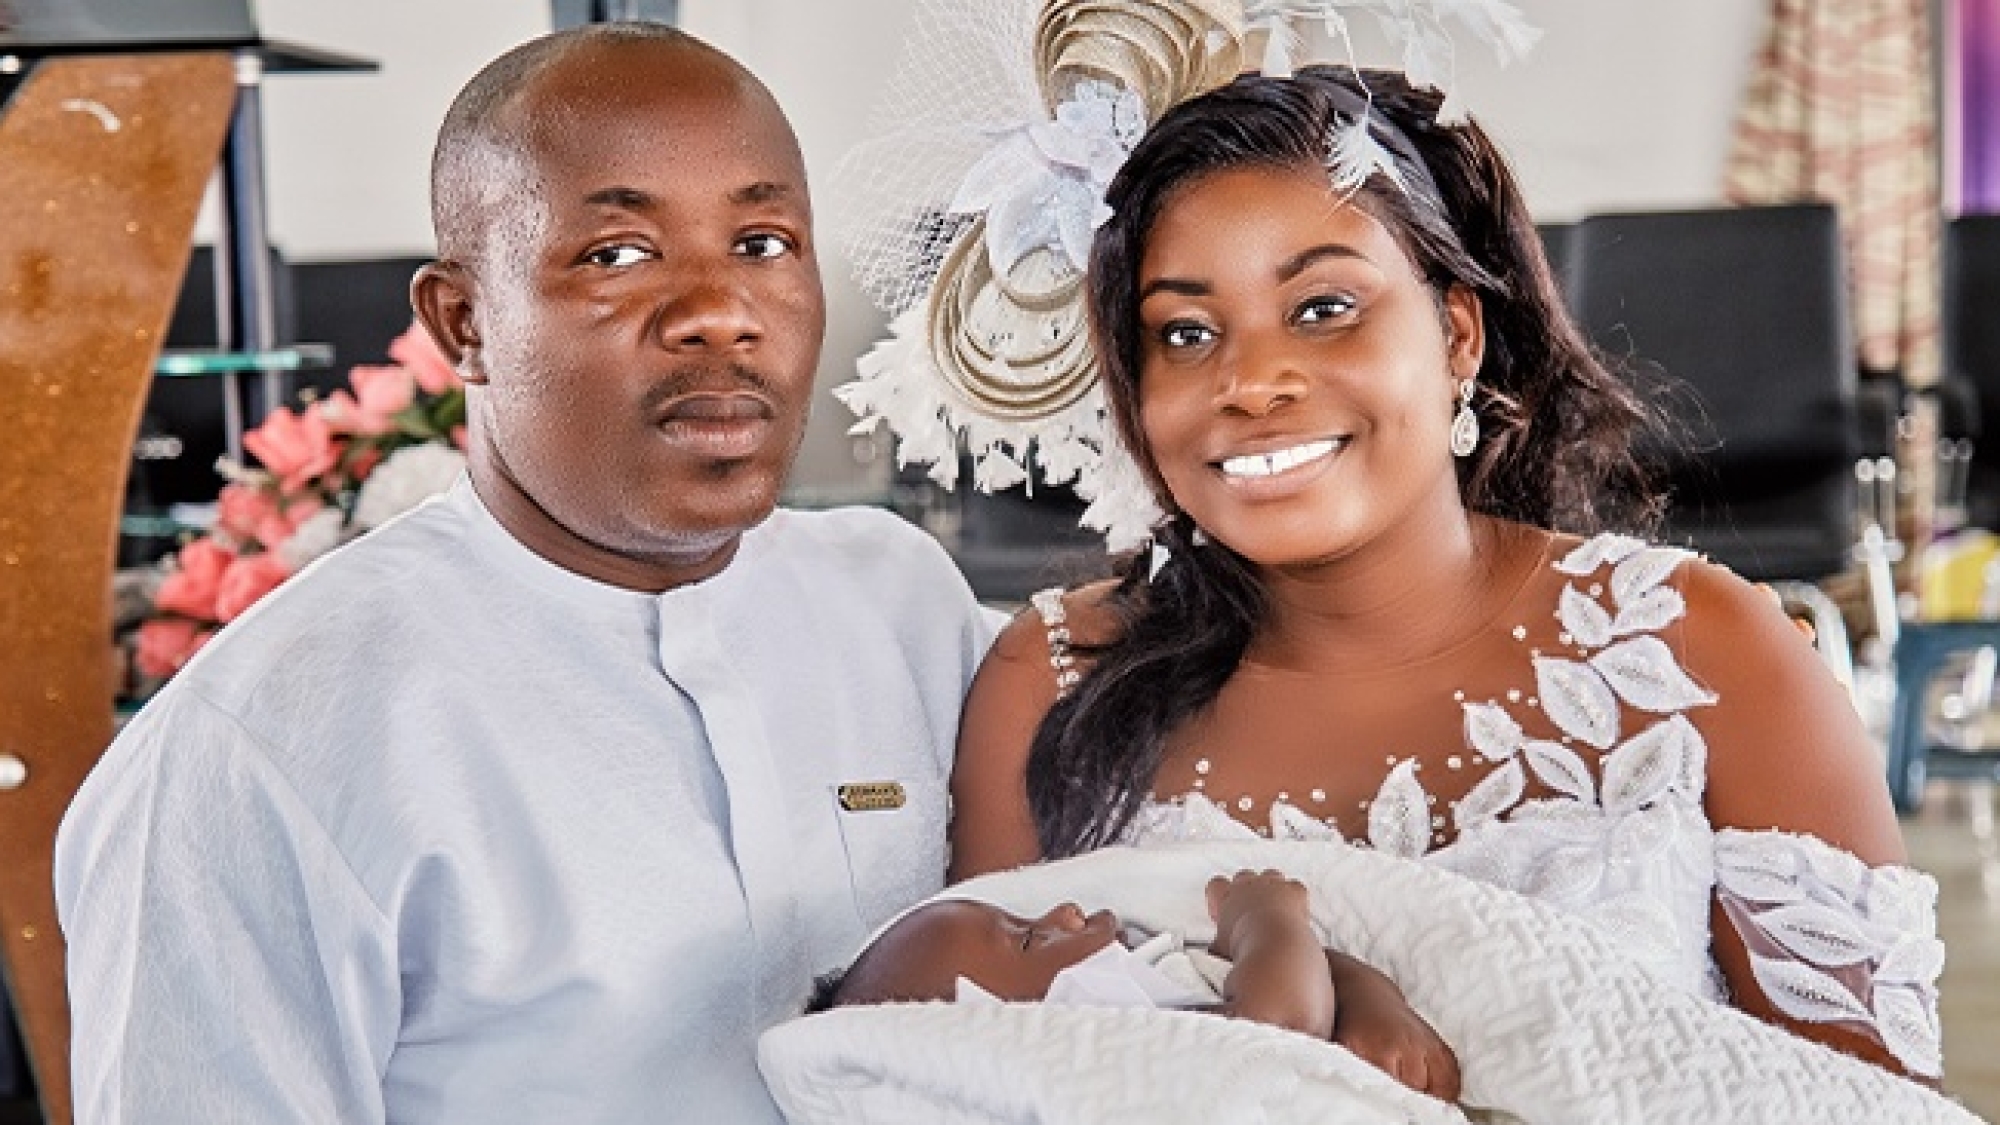 14 Years Of Cry Ends After Woman Delivers First Child web